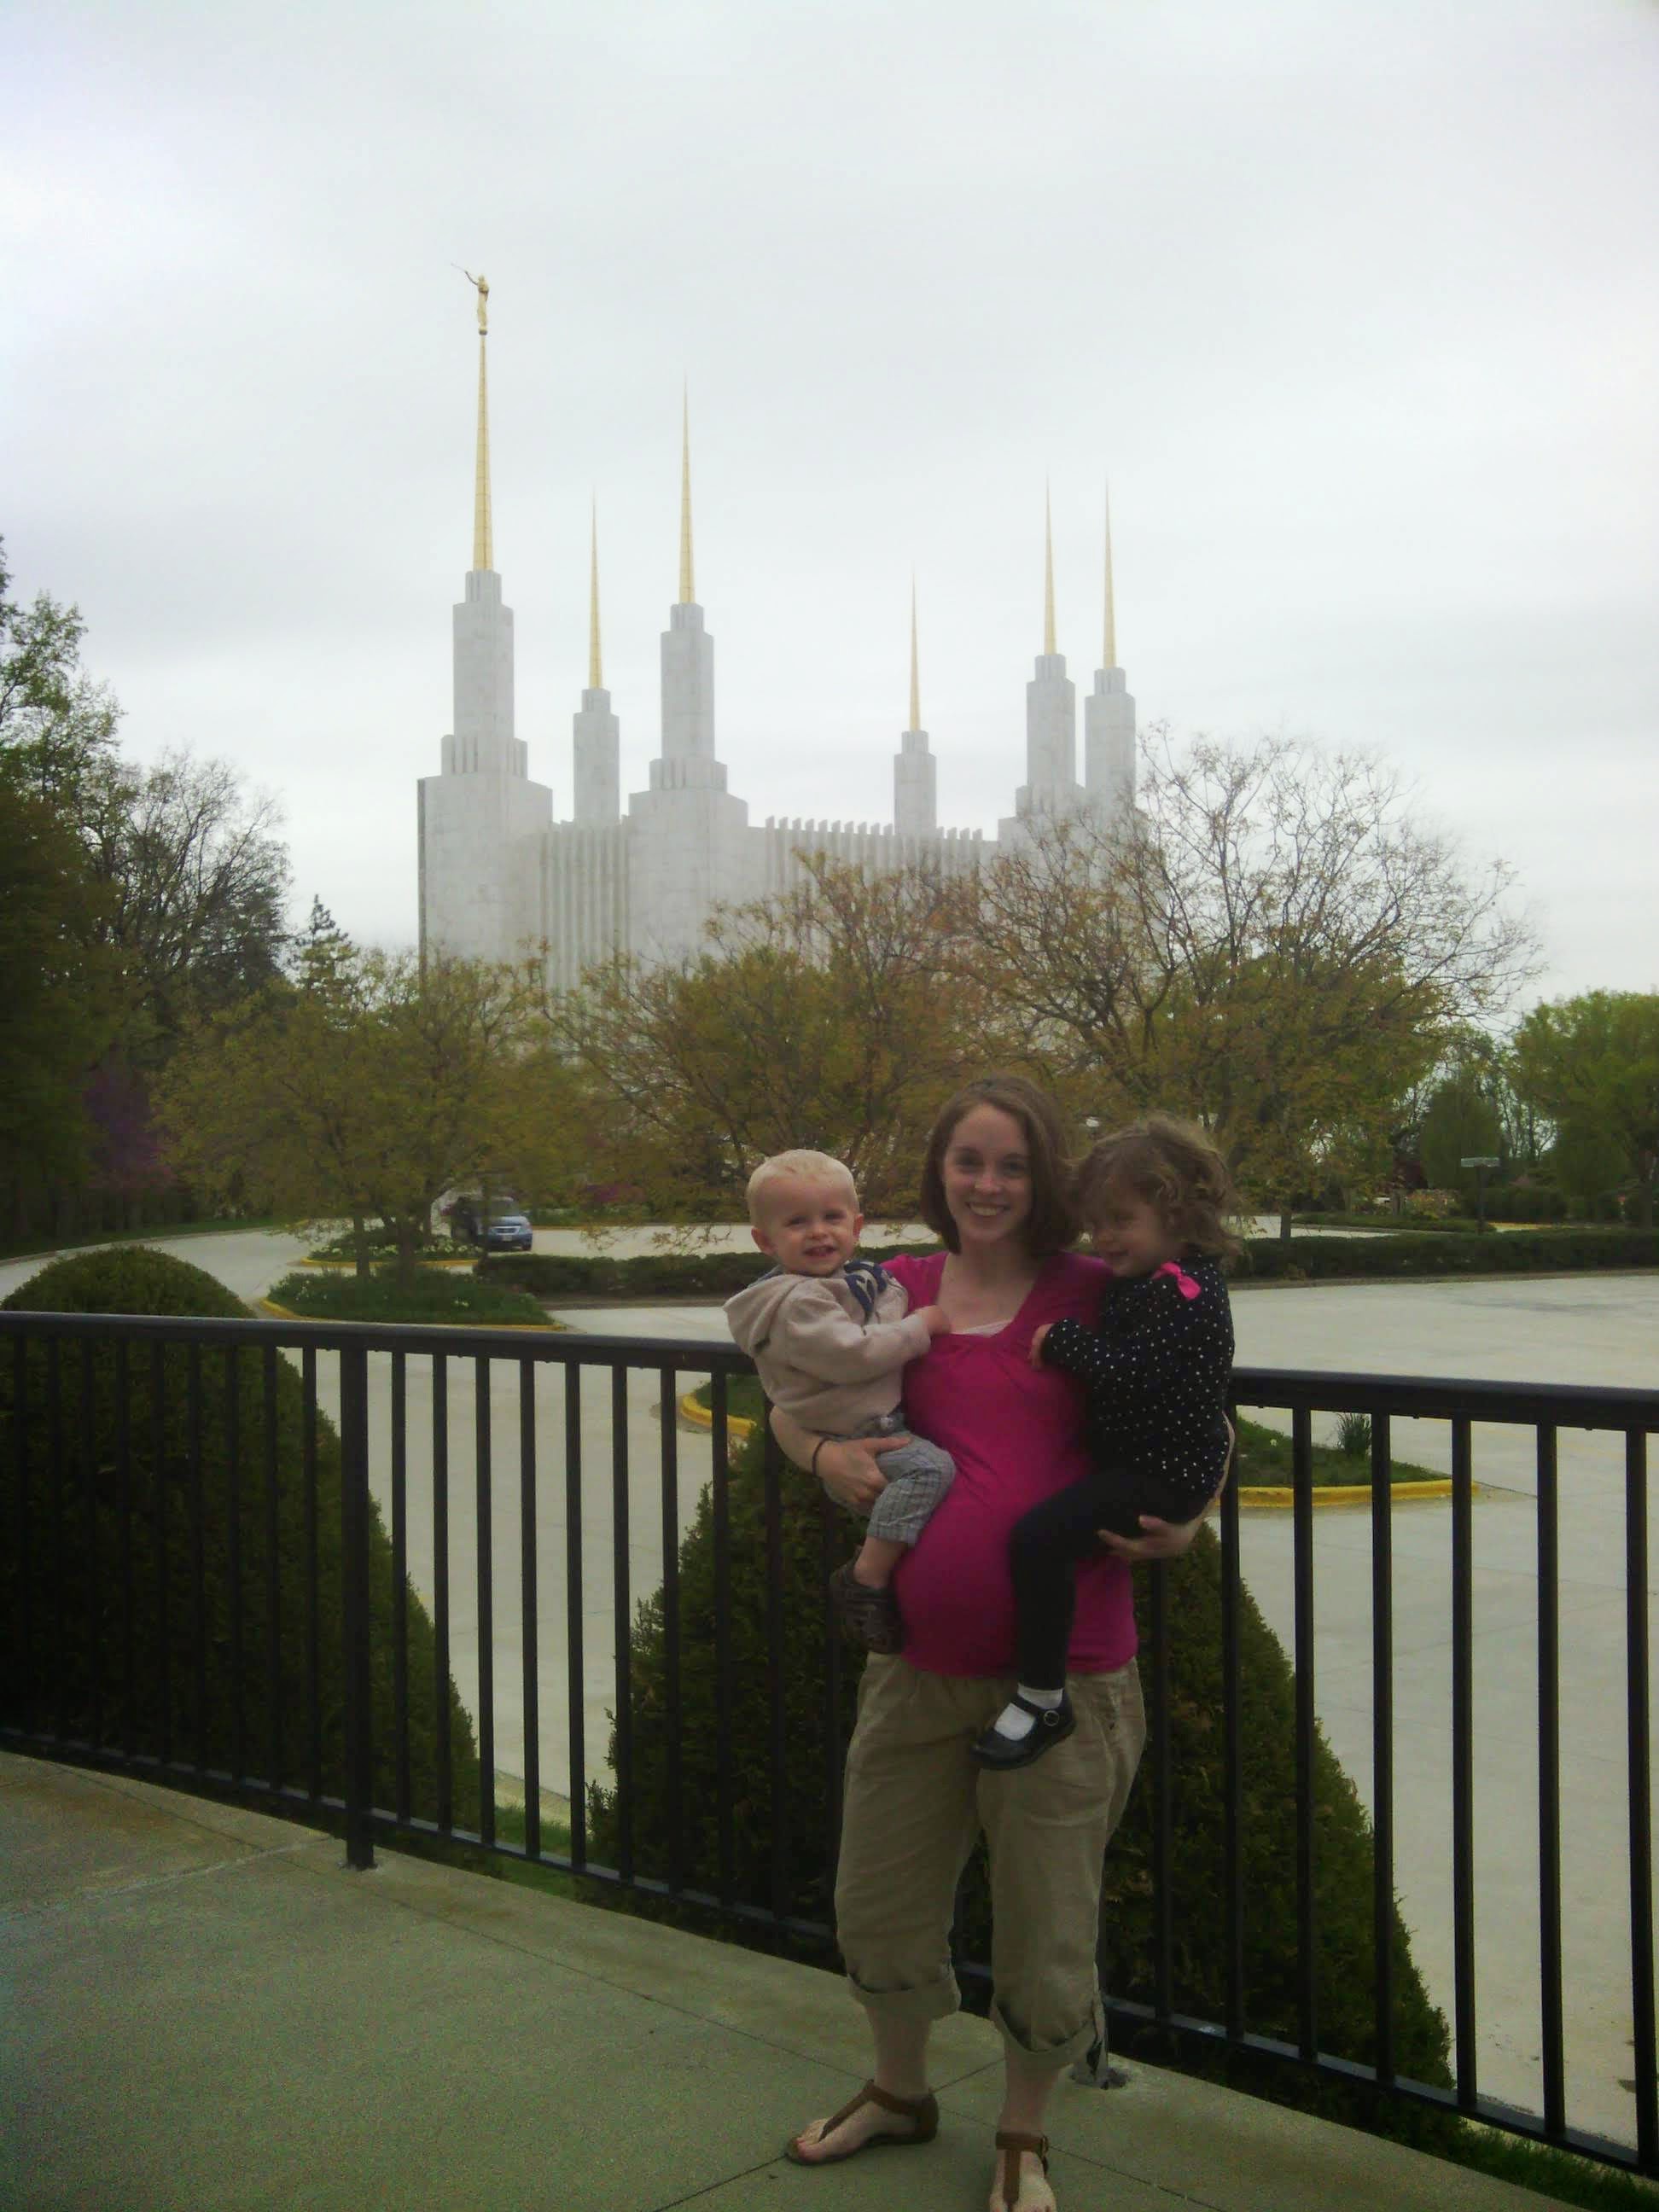 a pregnant woman holding two young children standing in front of the Washington DC temple